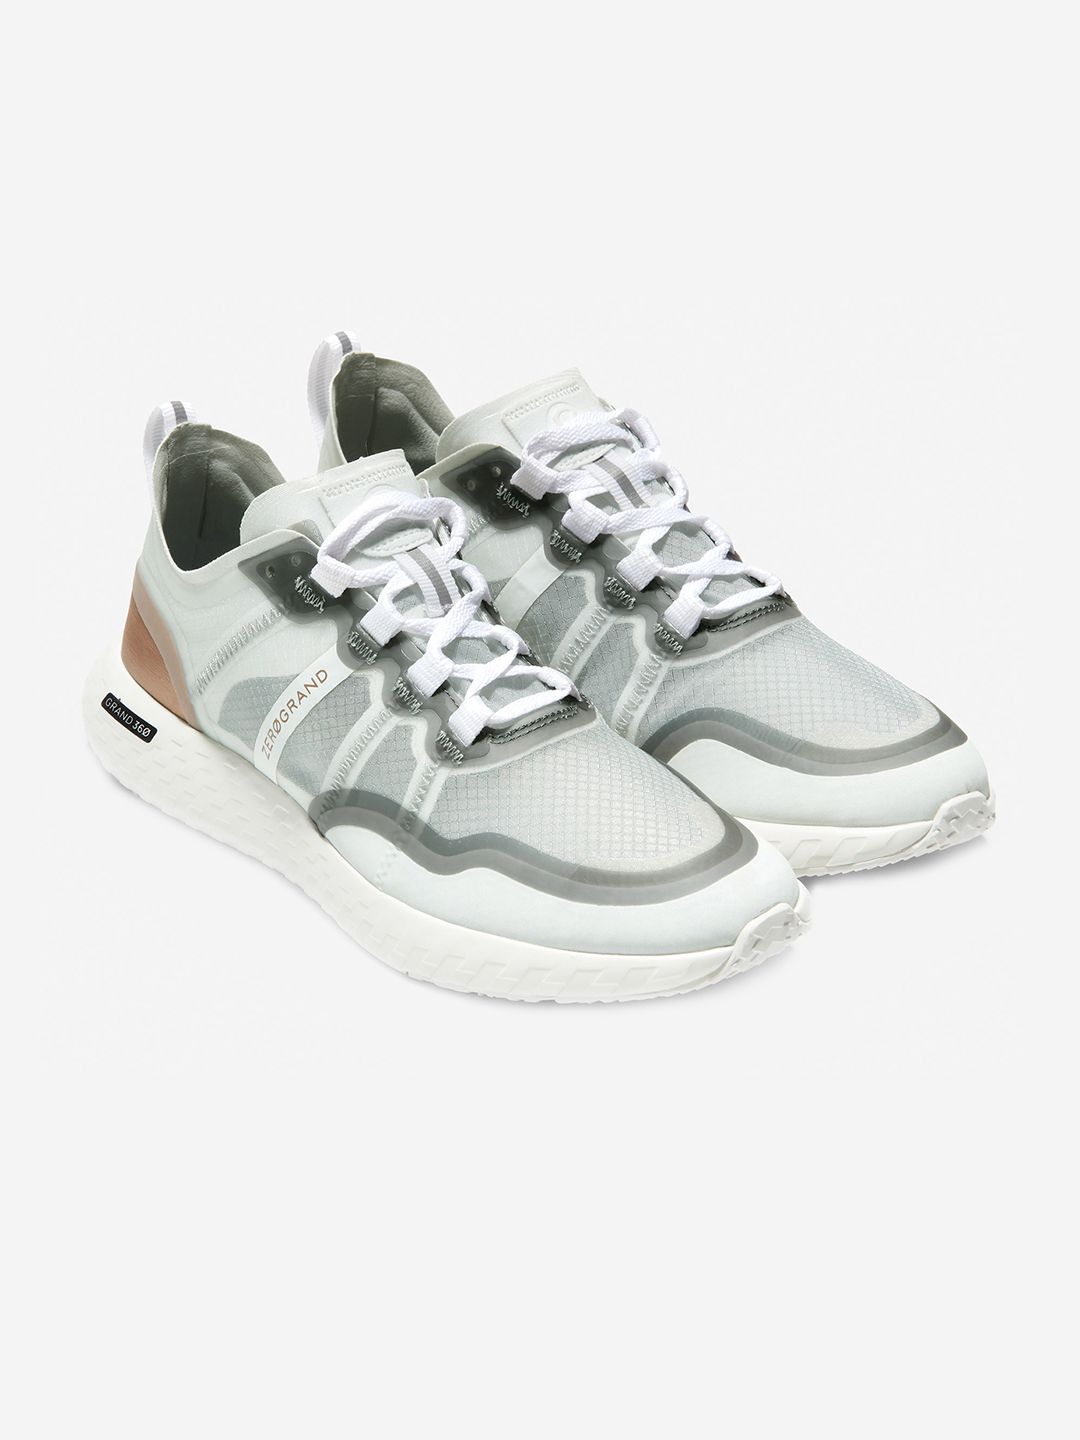 Cole Haan Women Off-White Running Shoes Price in India